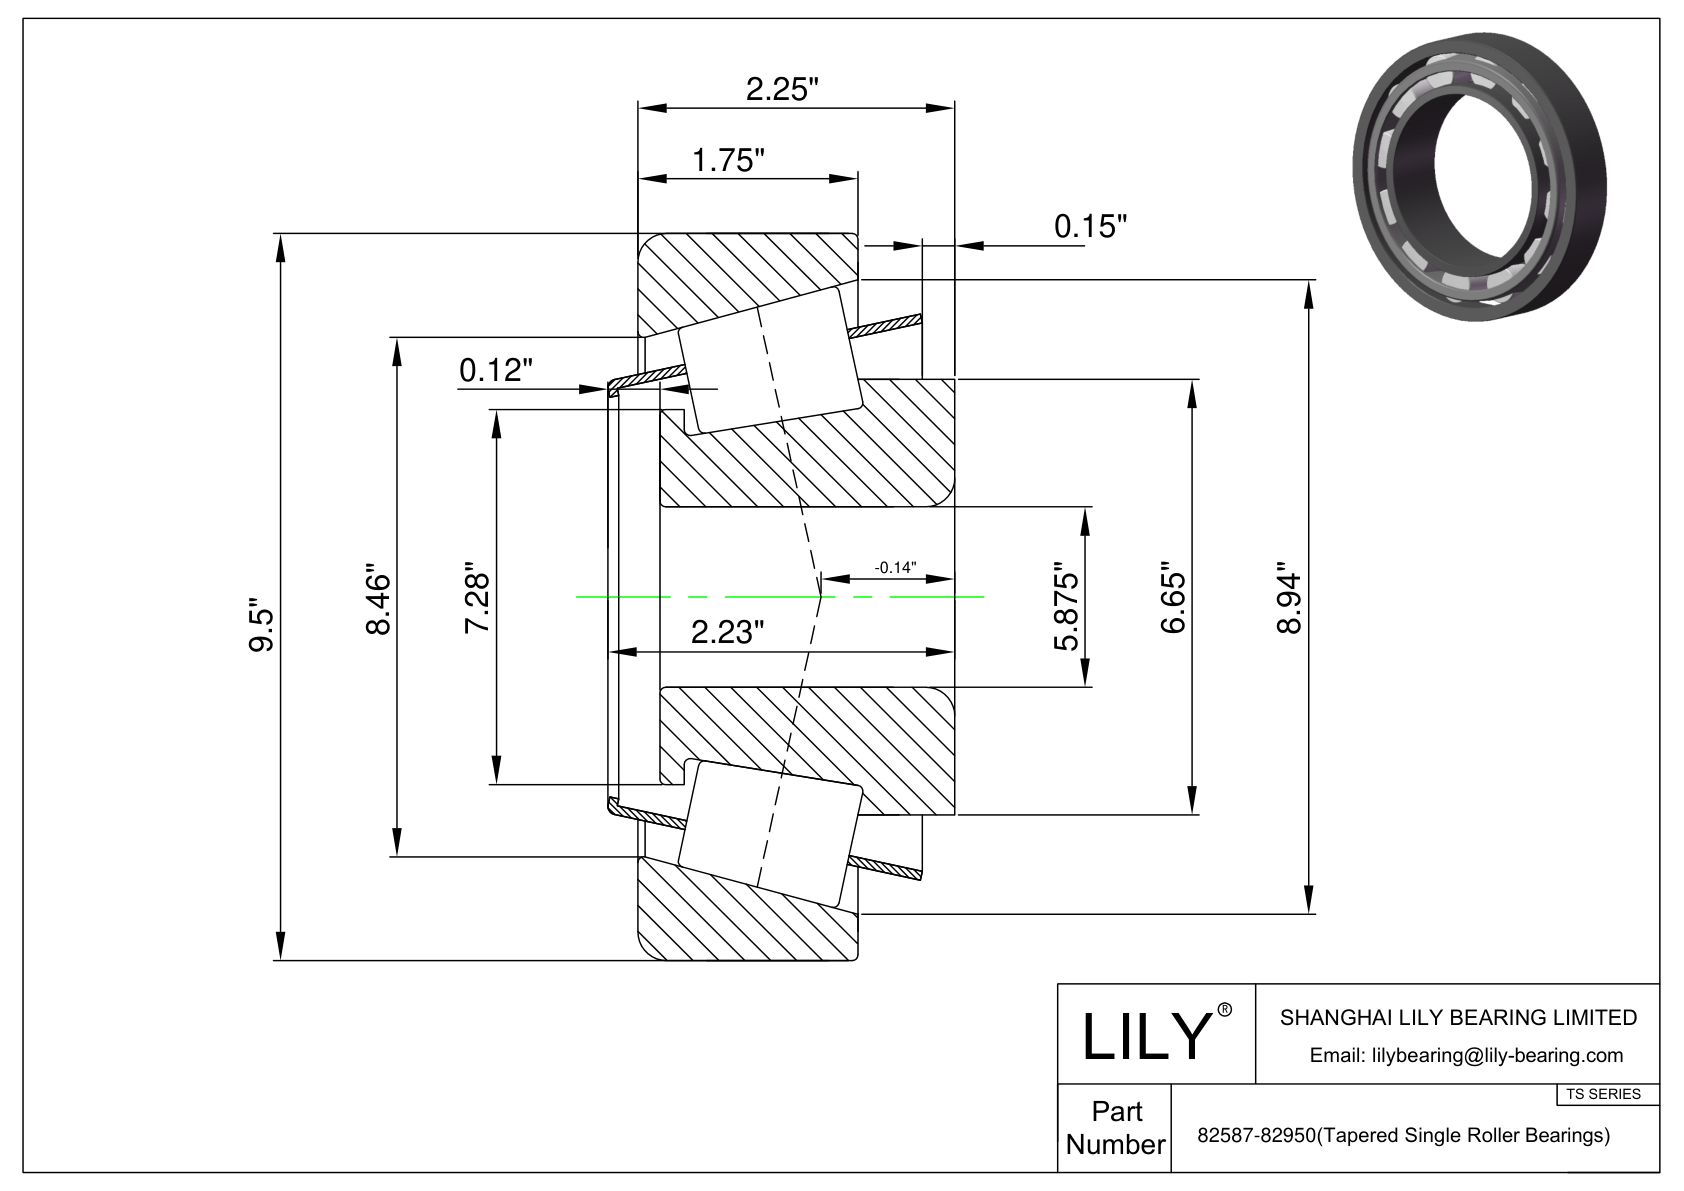 82587-82950 TS (Tapered Single Roller Bearings) (Imperial) cad drawing